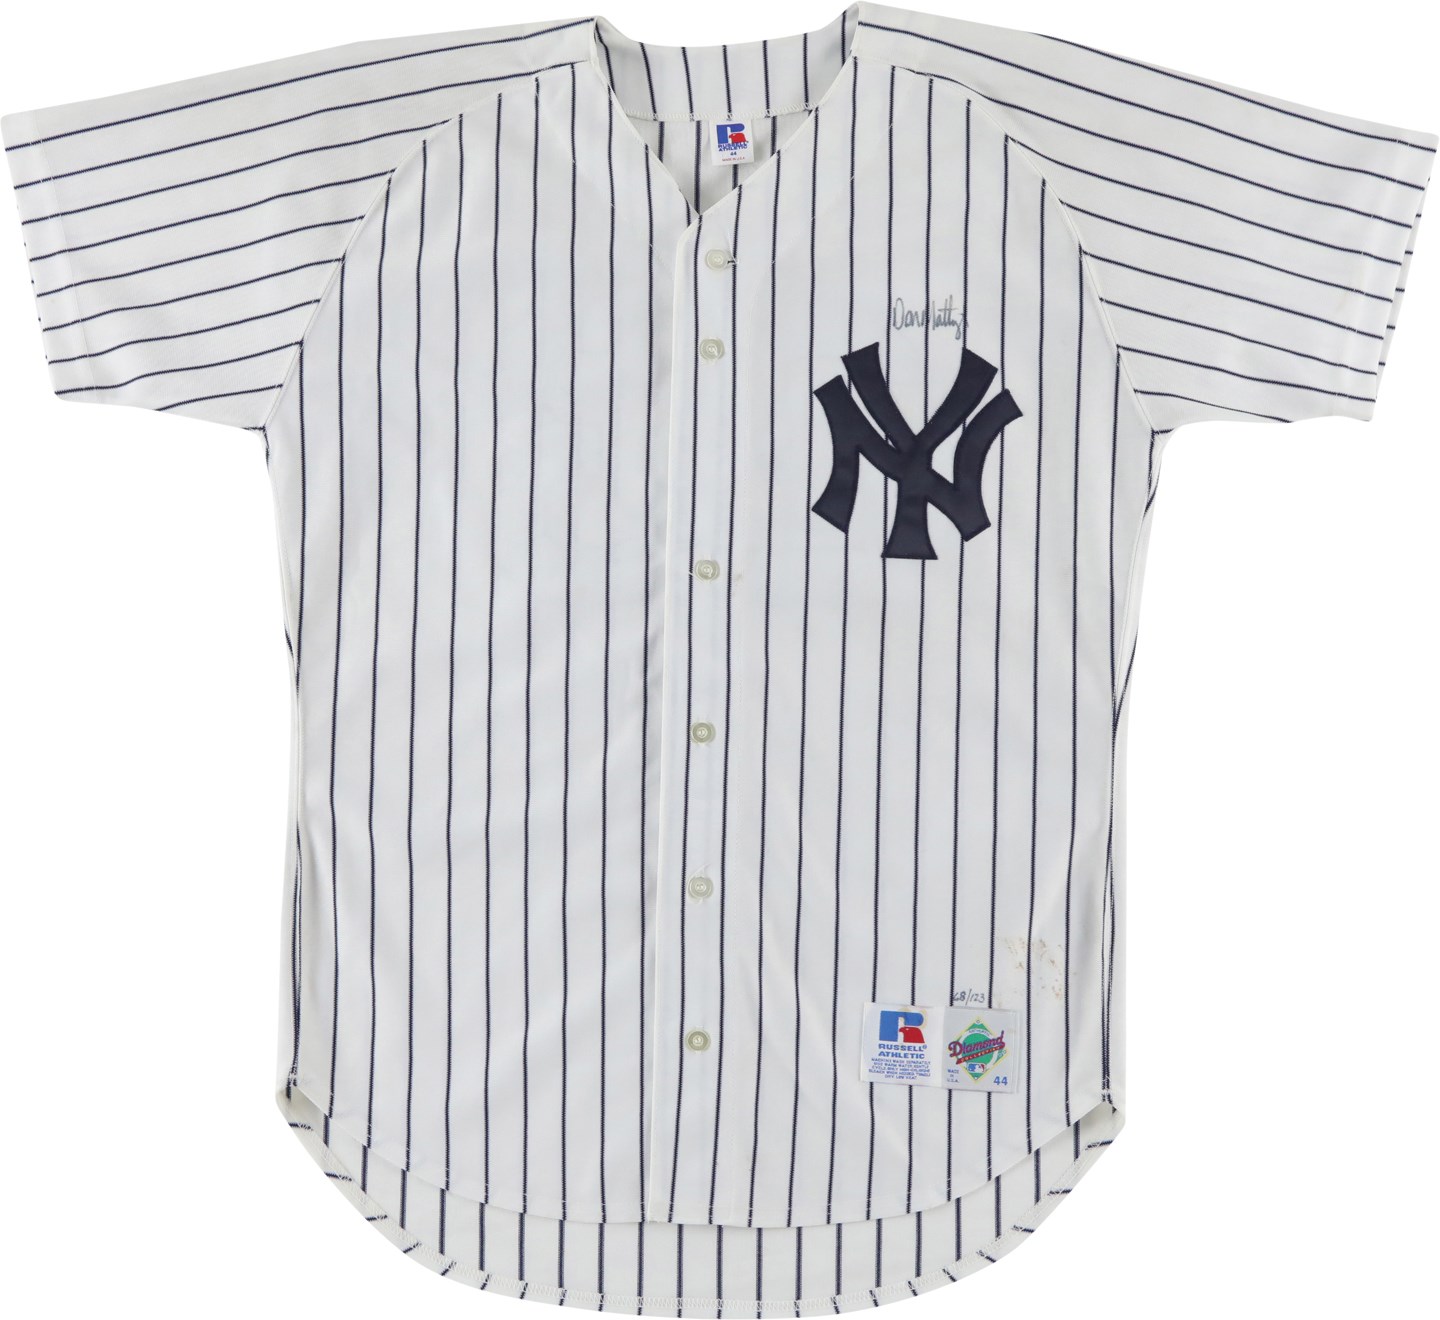 Baseball Autographs - Don Mattingly Signed Limited Edition Yankees Jersey 68/123